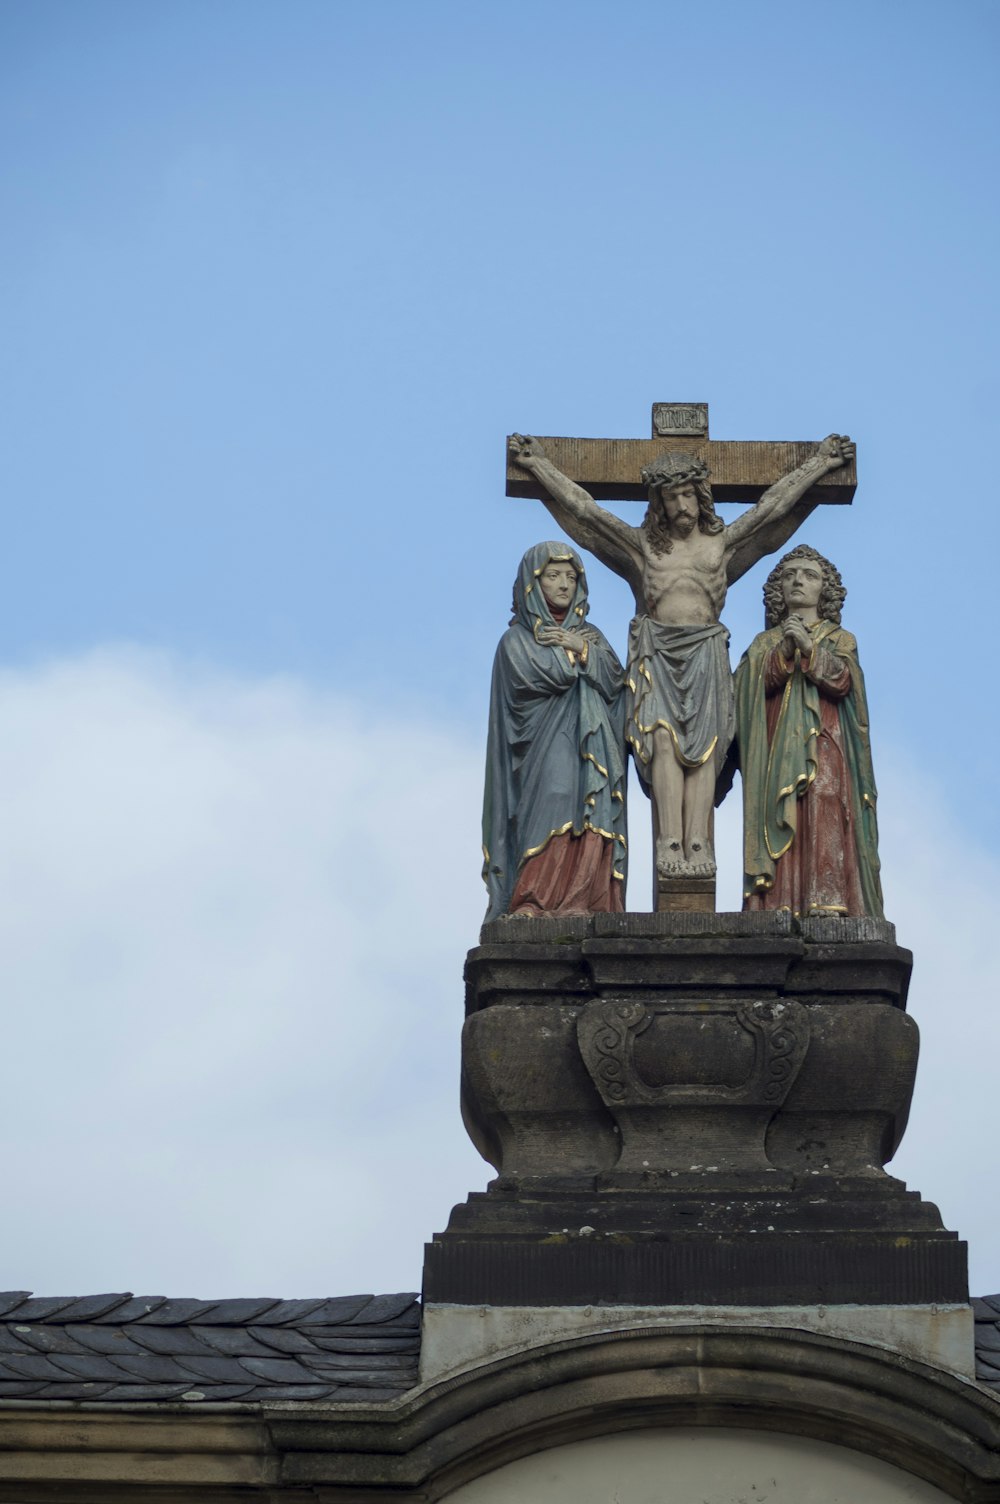 a statue of jesus on the cross on top of a building